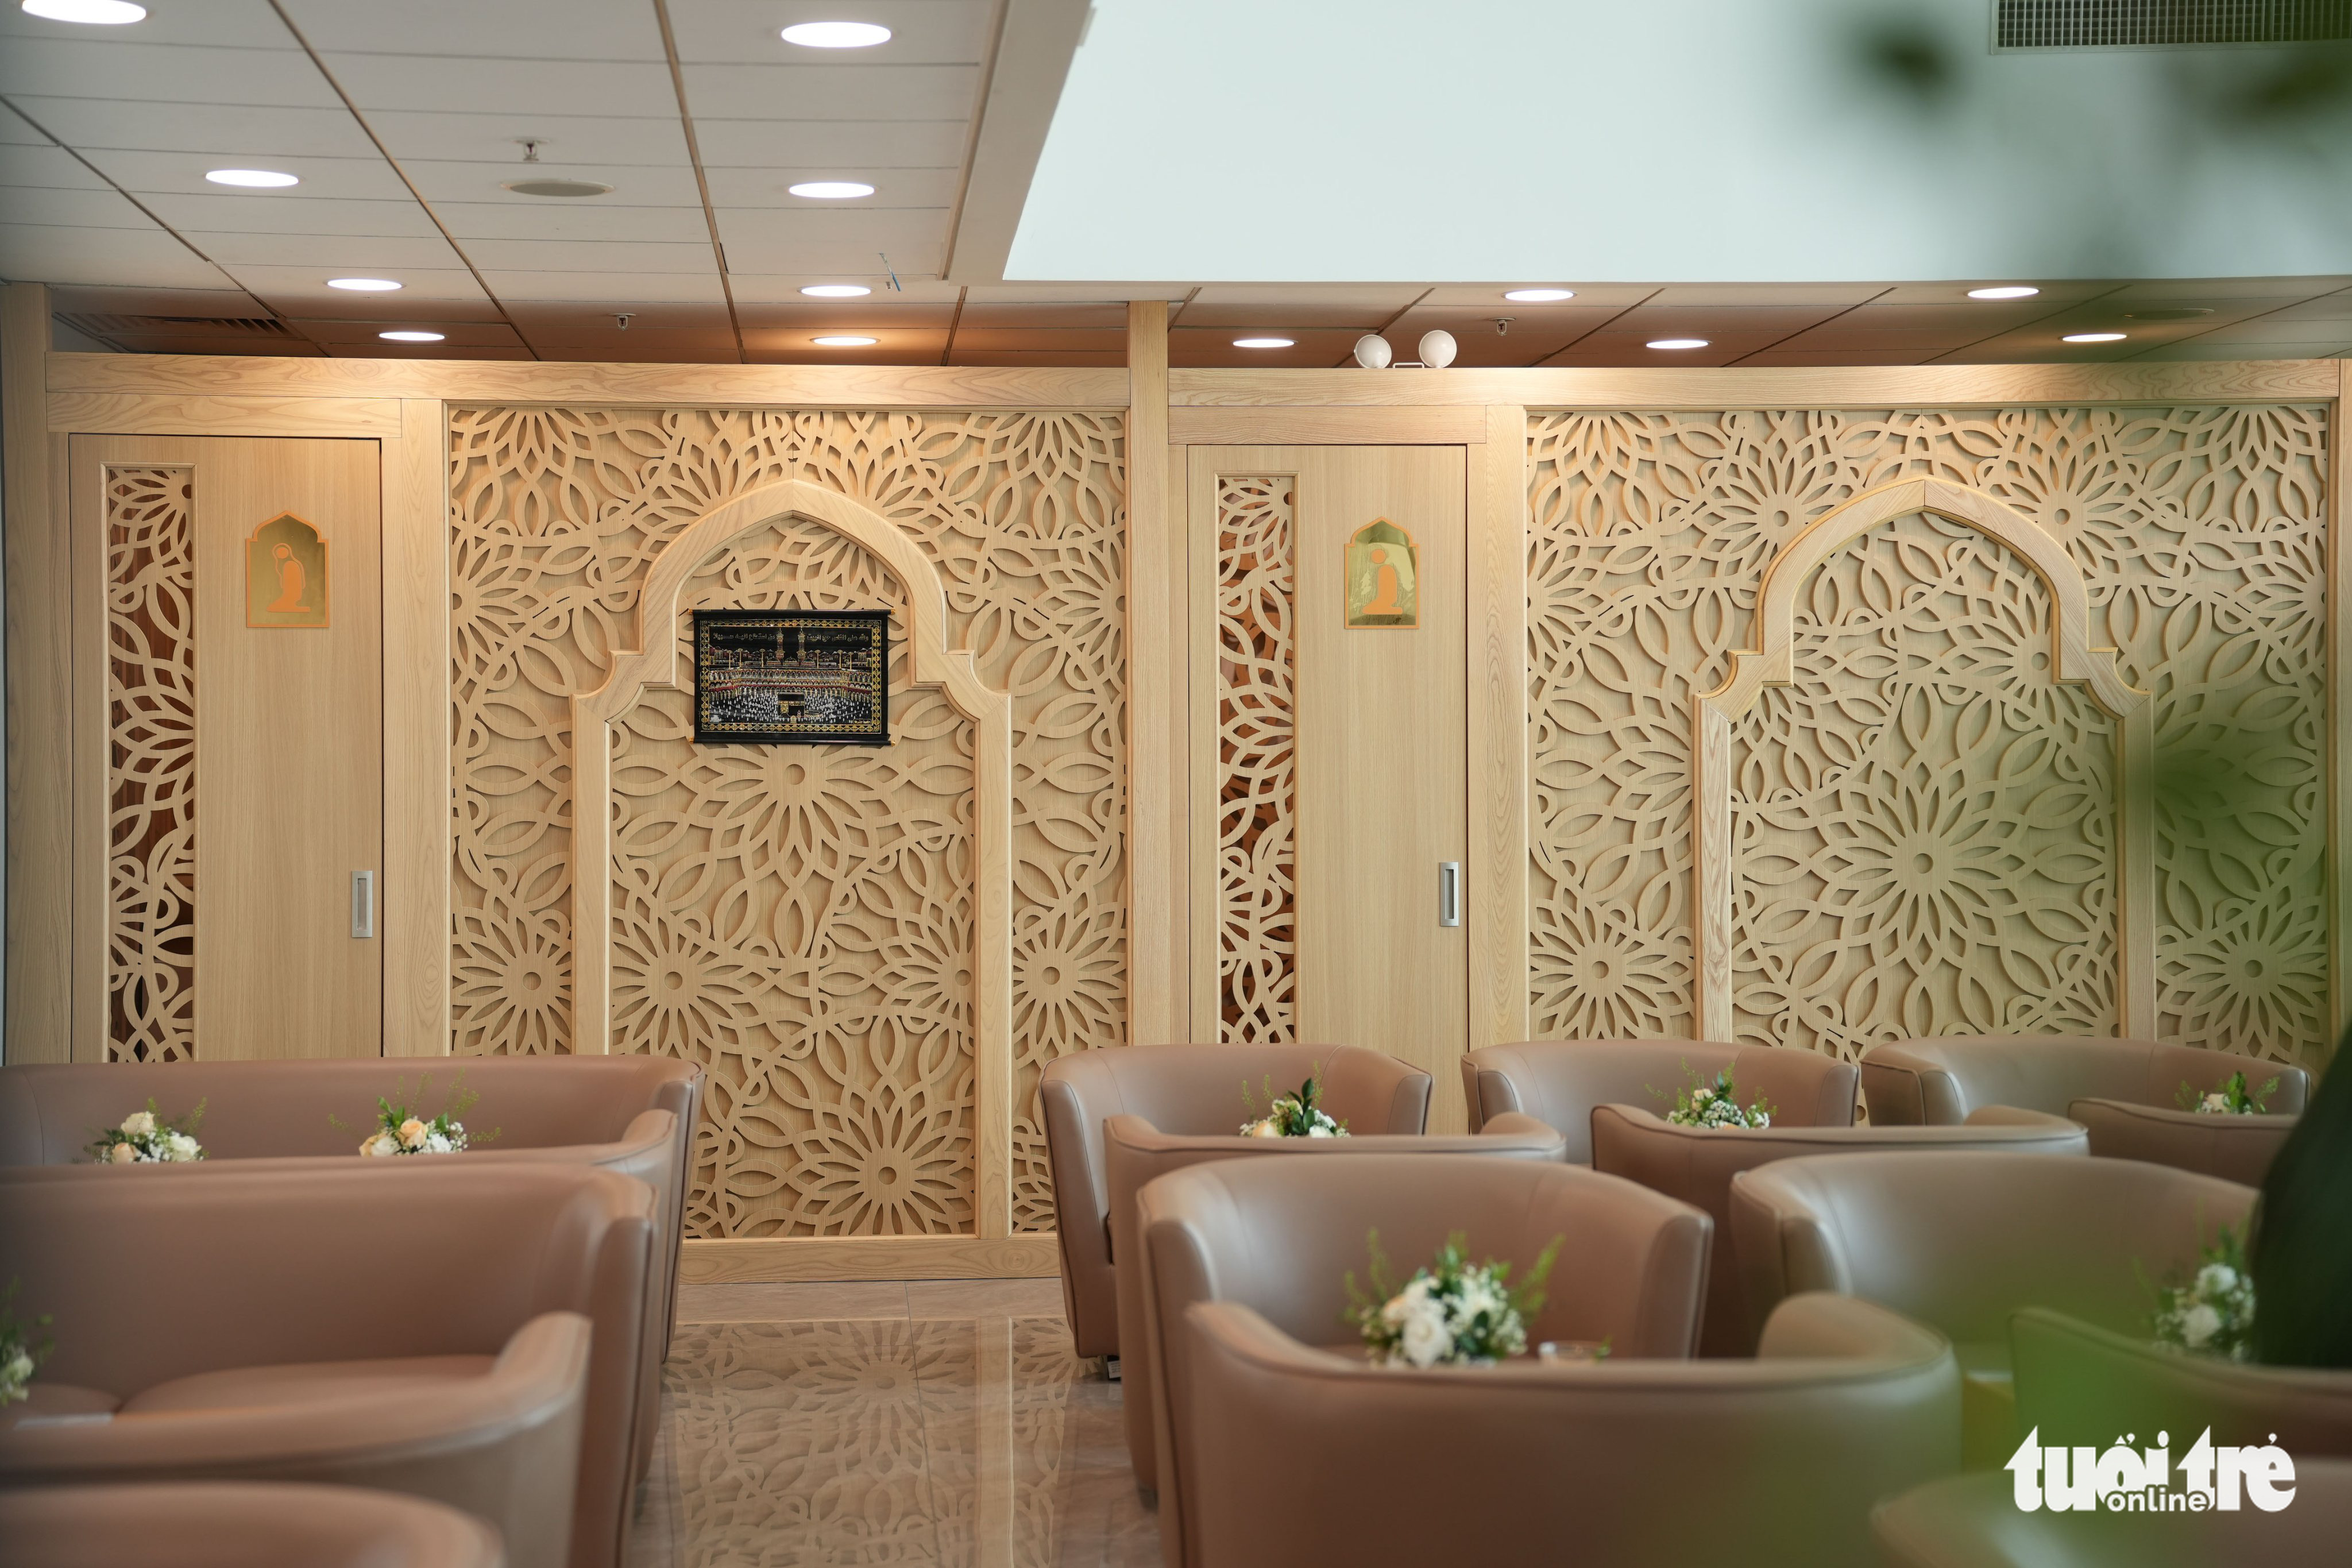 Separate prayer rooms for men and women inside the Jasmine lounge for Muslims at Tan Son Nhat International Airport in Ho Chi Minh City. Photo: D.P. / Tuoi Tre